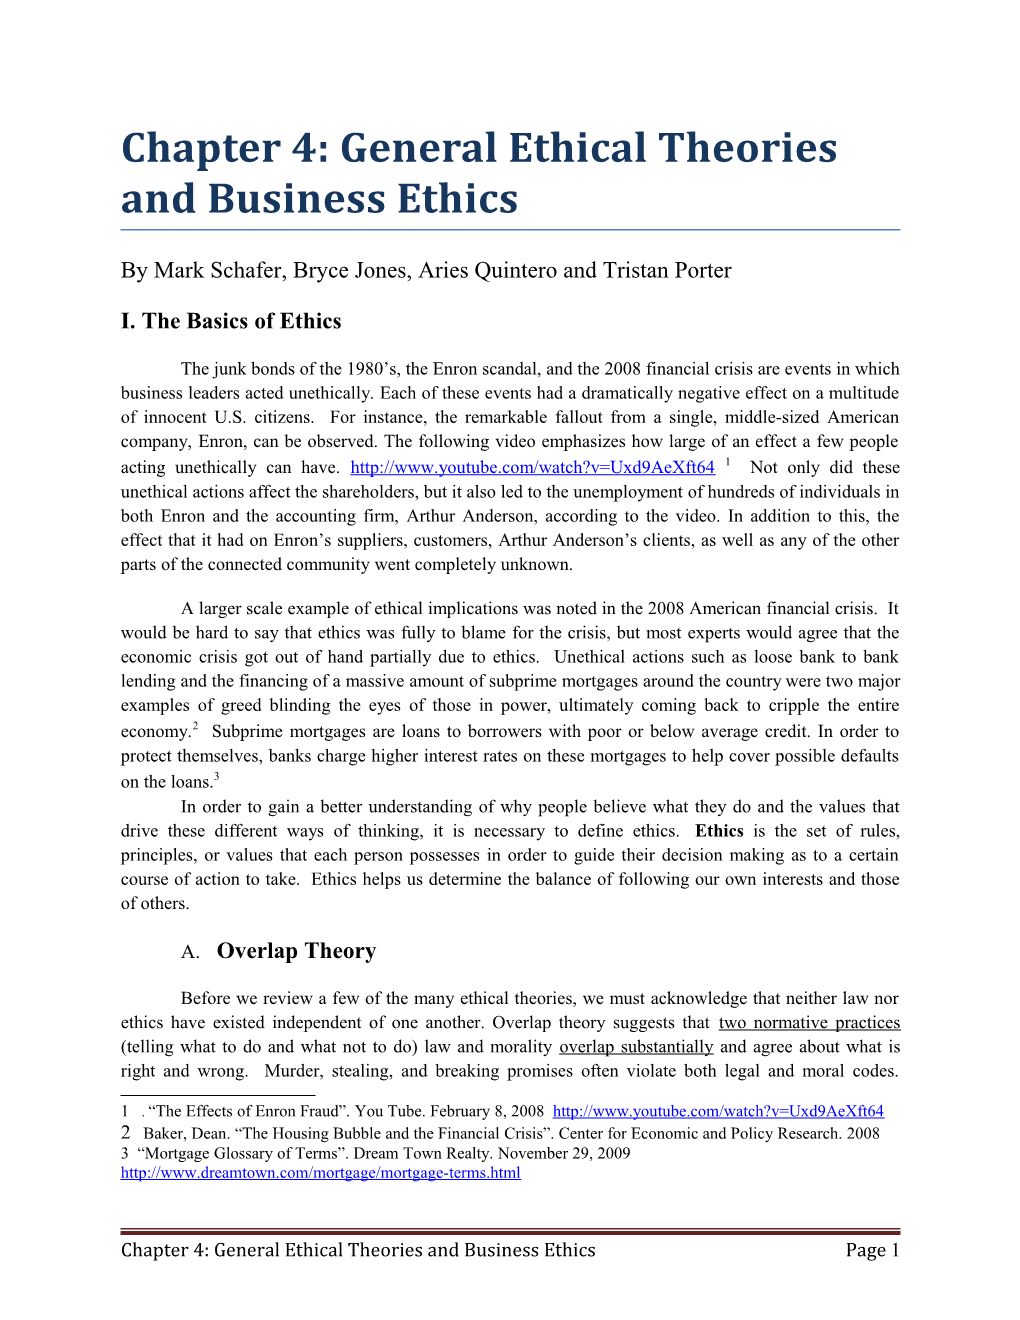 The Importance of Ethics in Business